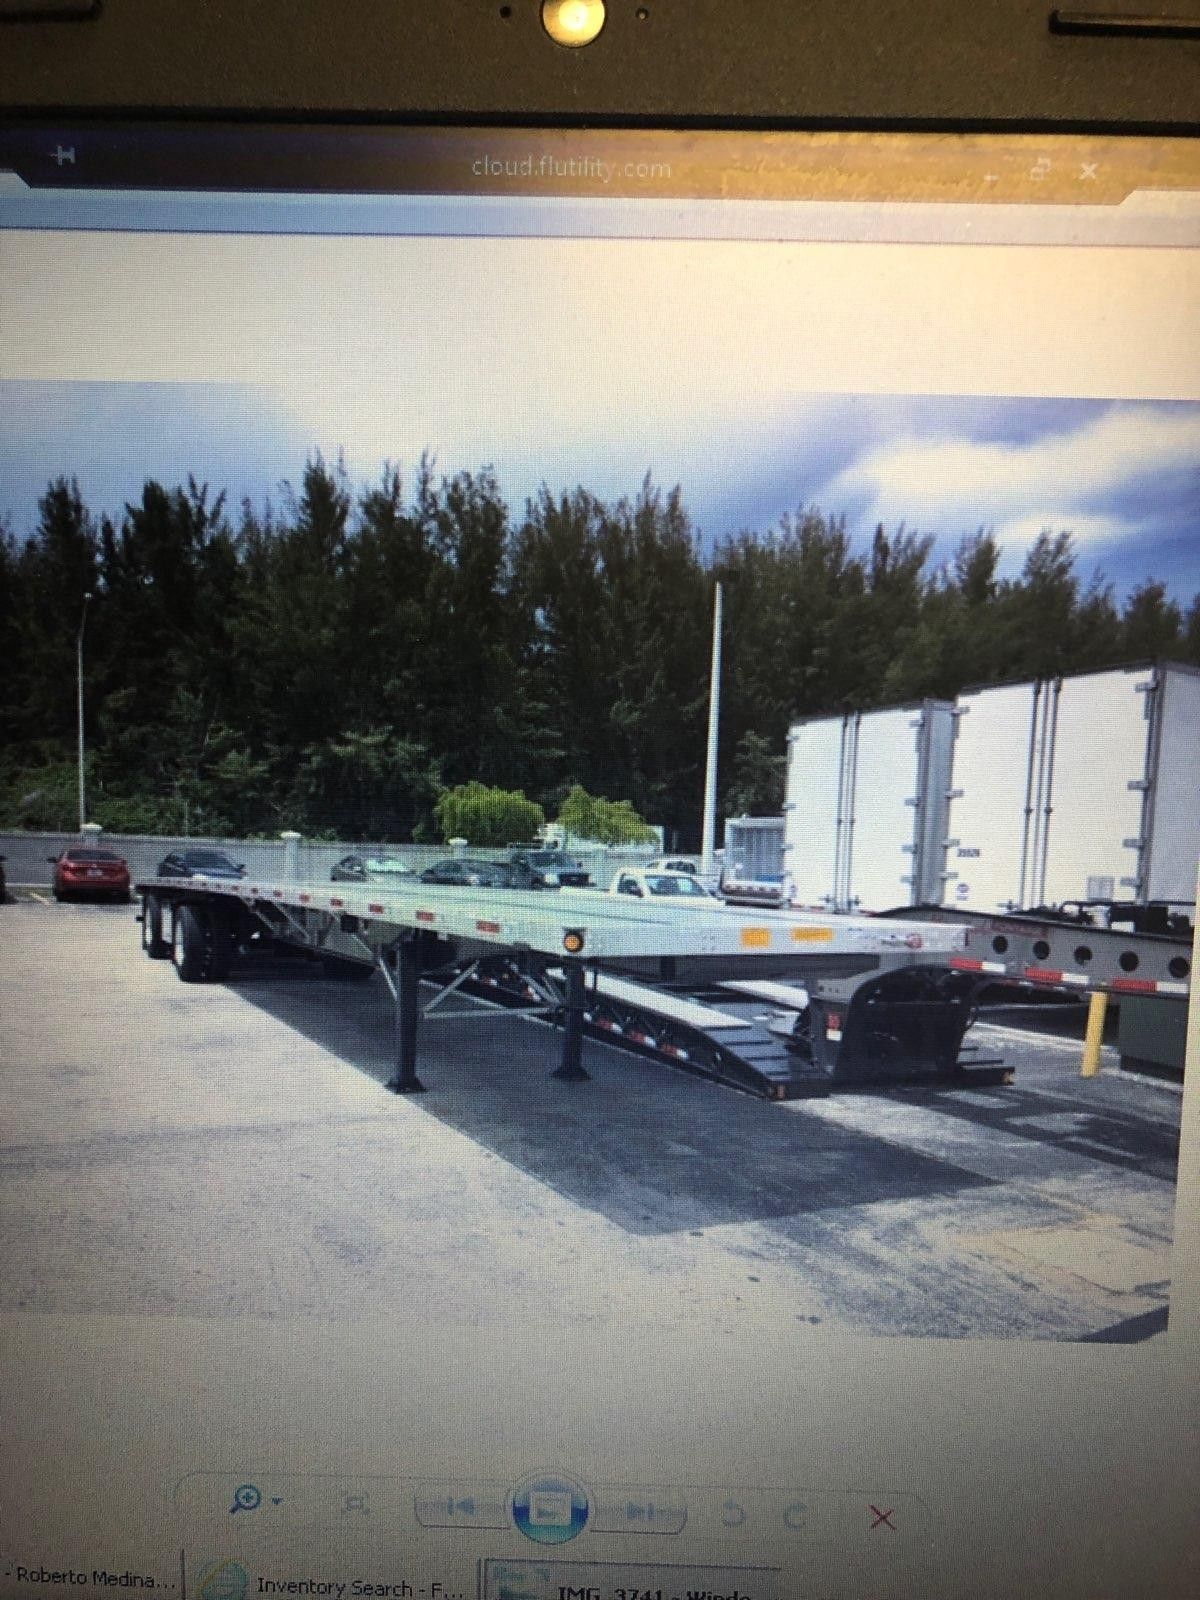 Flat bed trailer for rent